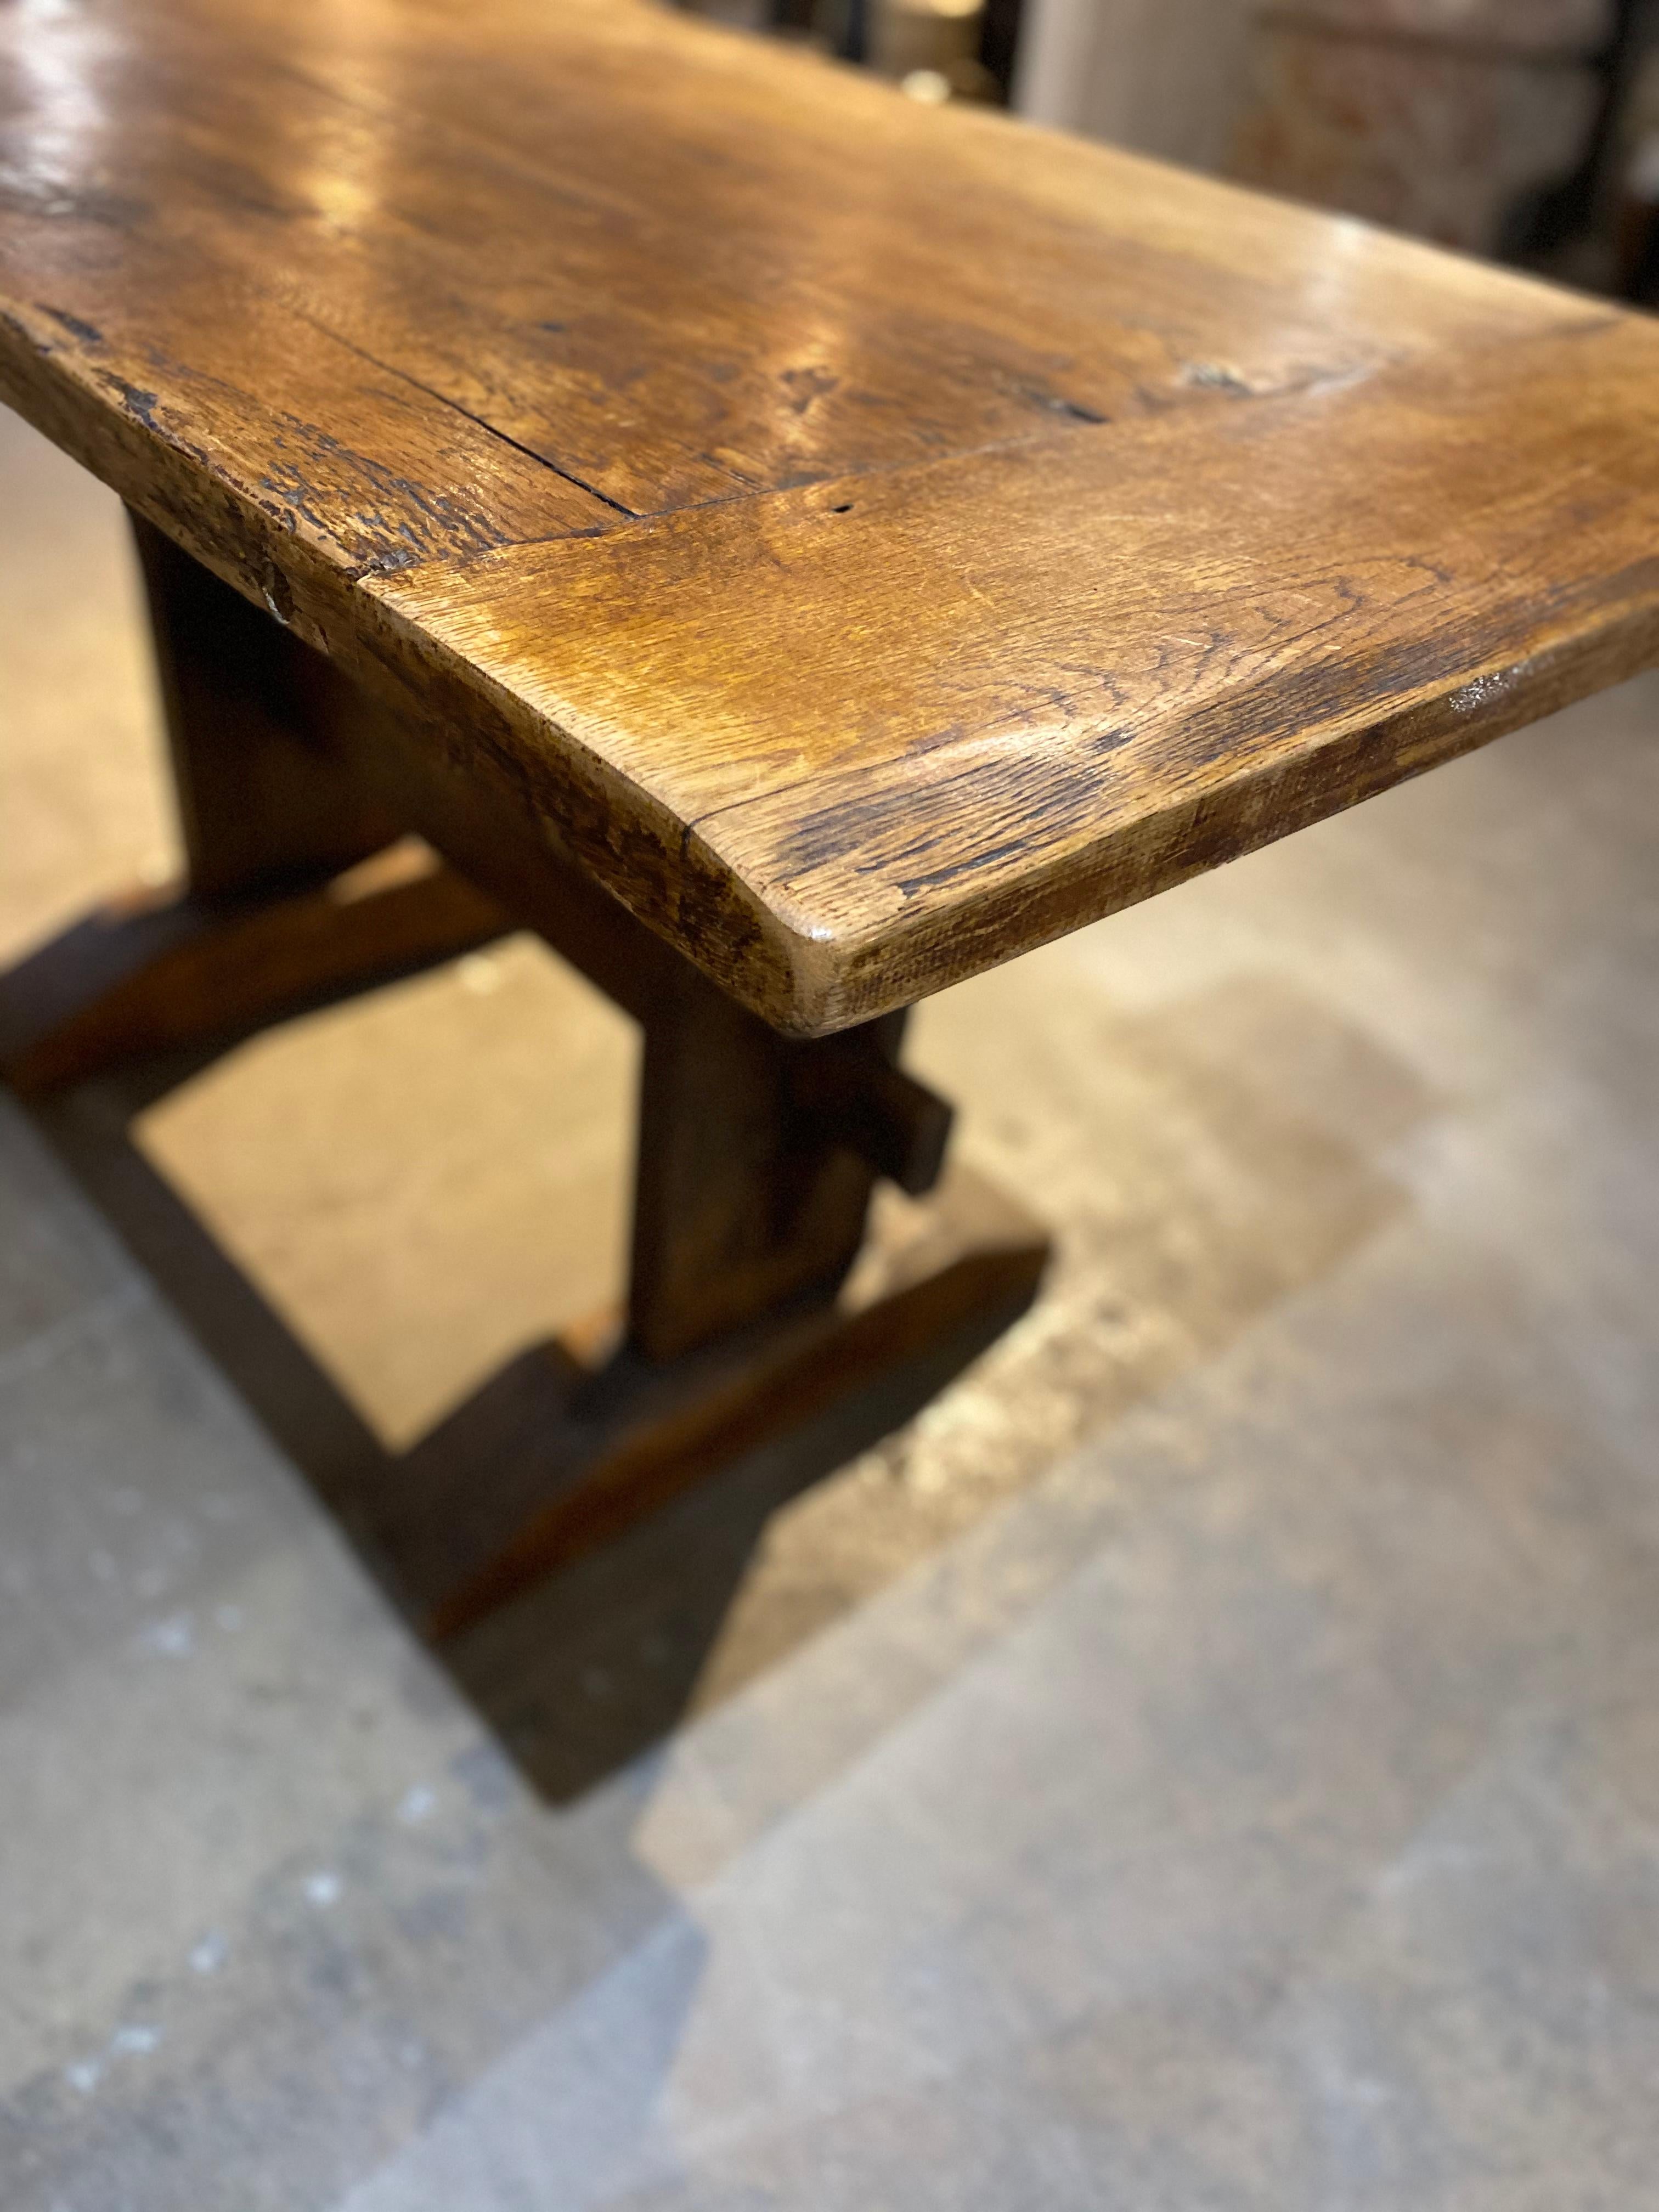 This antique table is made of oak, originates from France circa 1900, and makes for an excellent desk.

Measurements: 56” L x 29.5” D x 31” H.